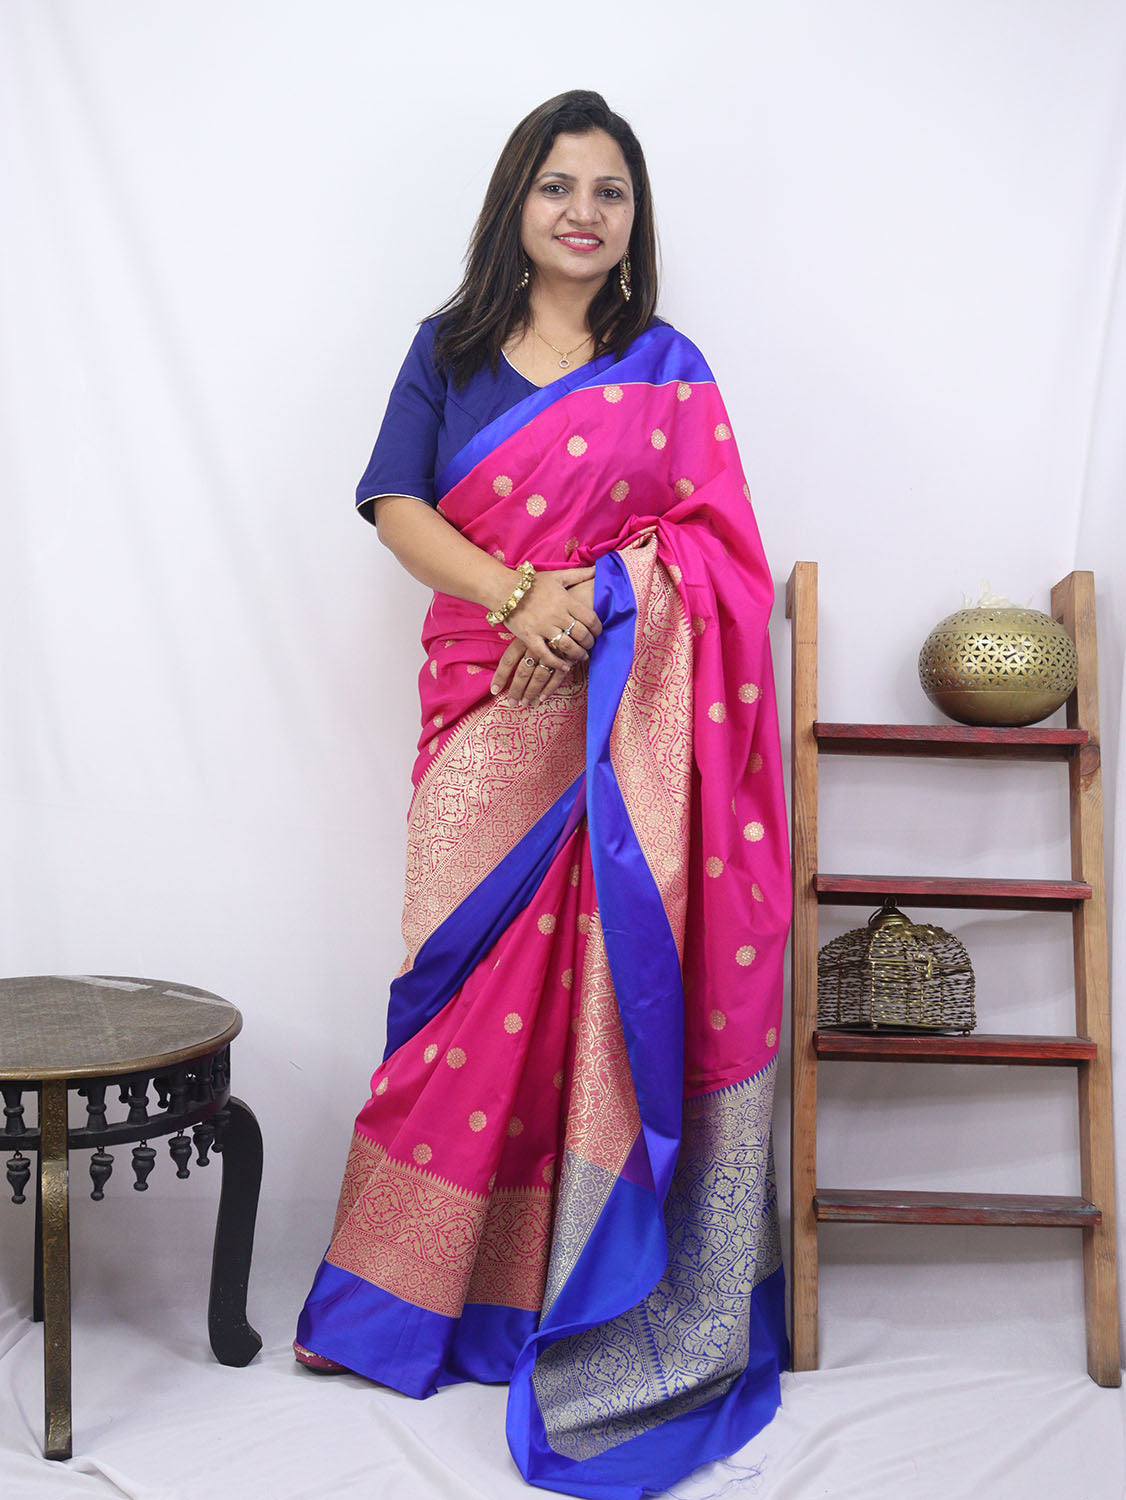 Shop Now for Pink Handloom Banarasi Soft Silk Saree with Contrast Border - Latest Collection